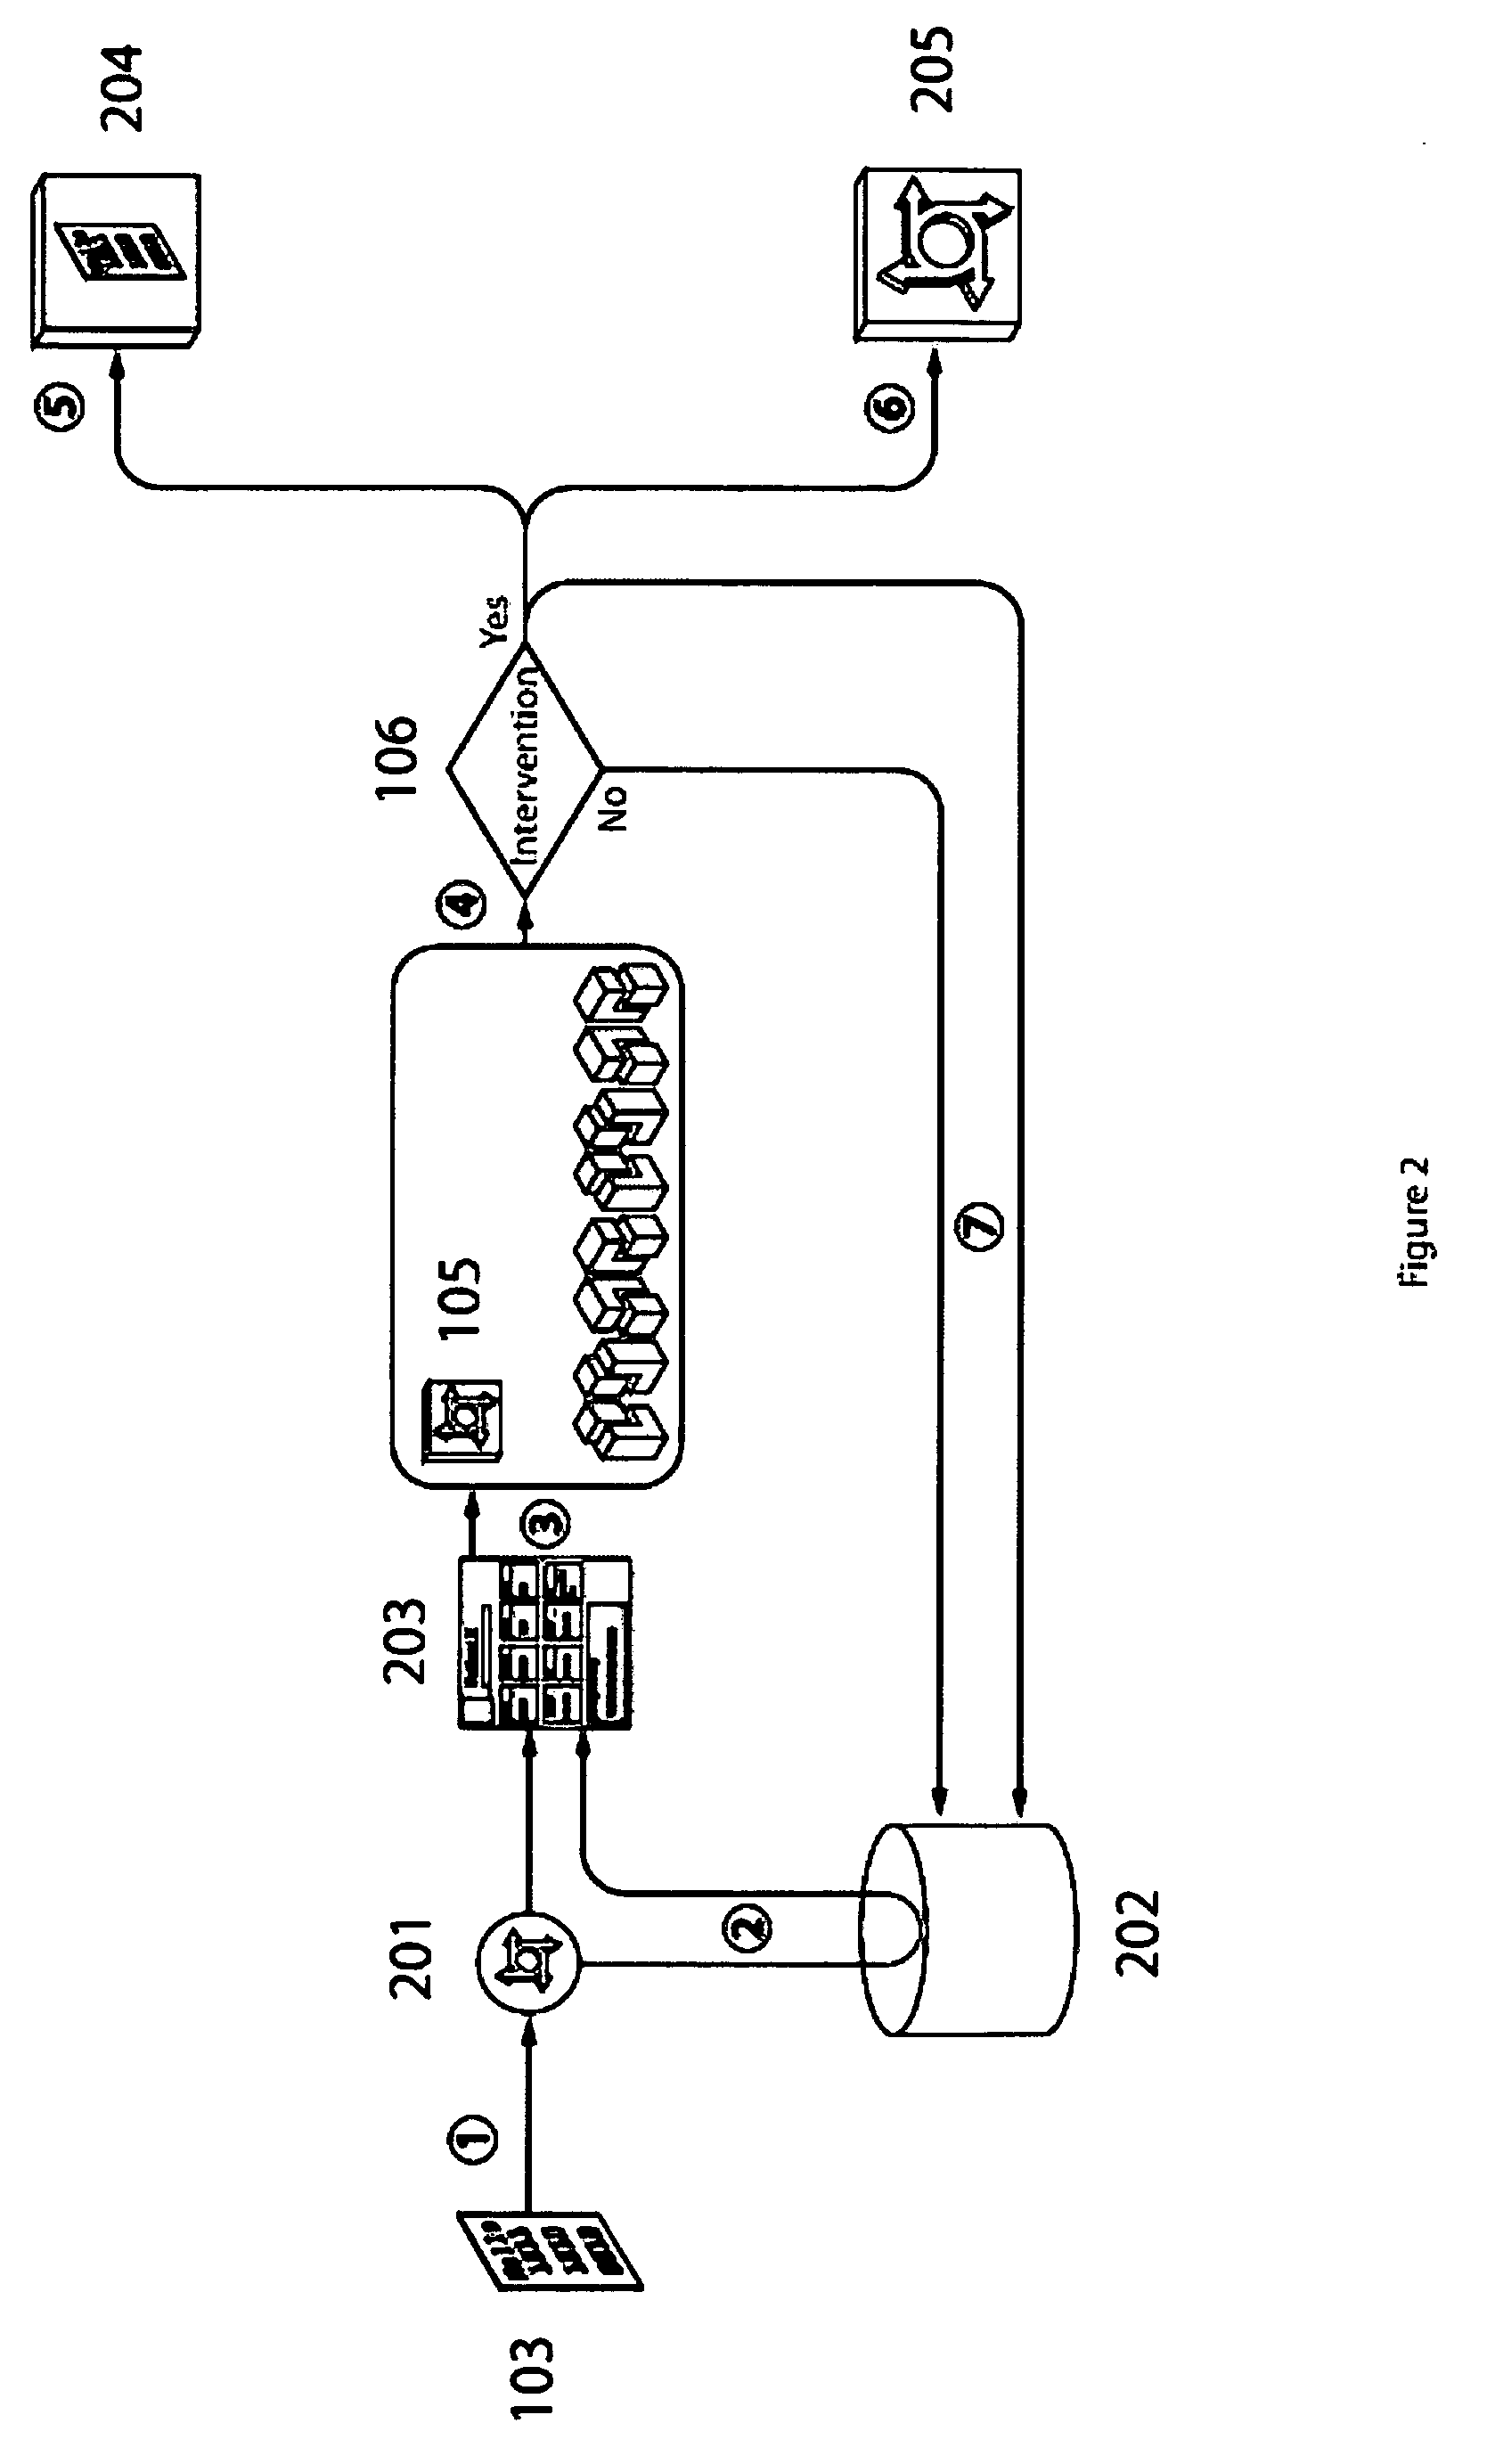 Health information system and method